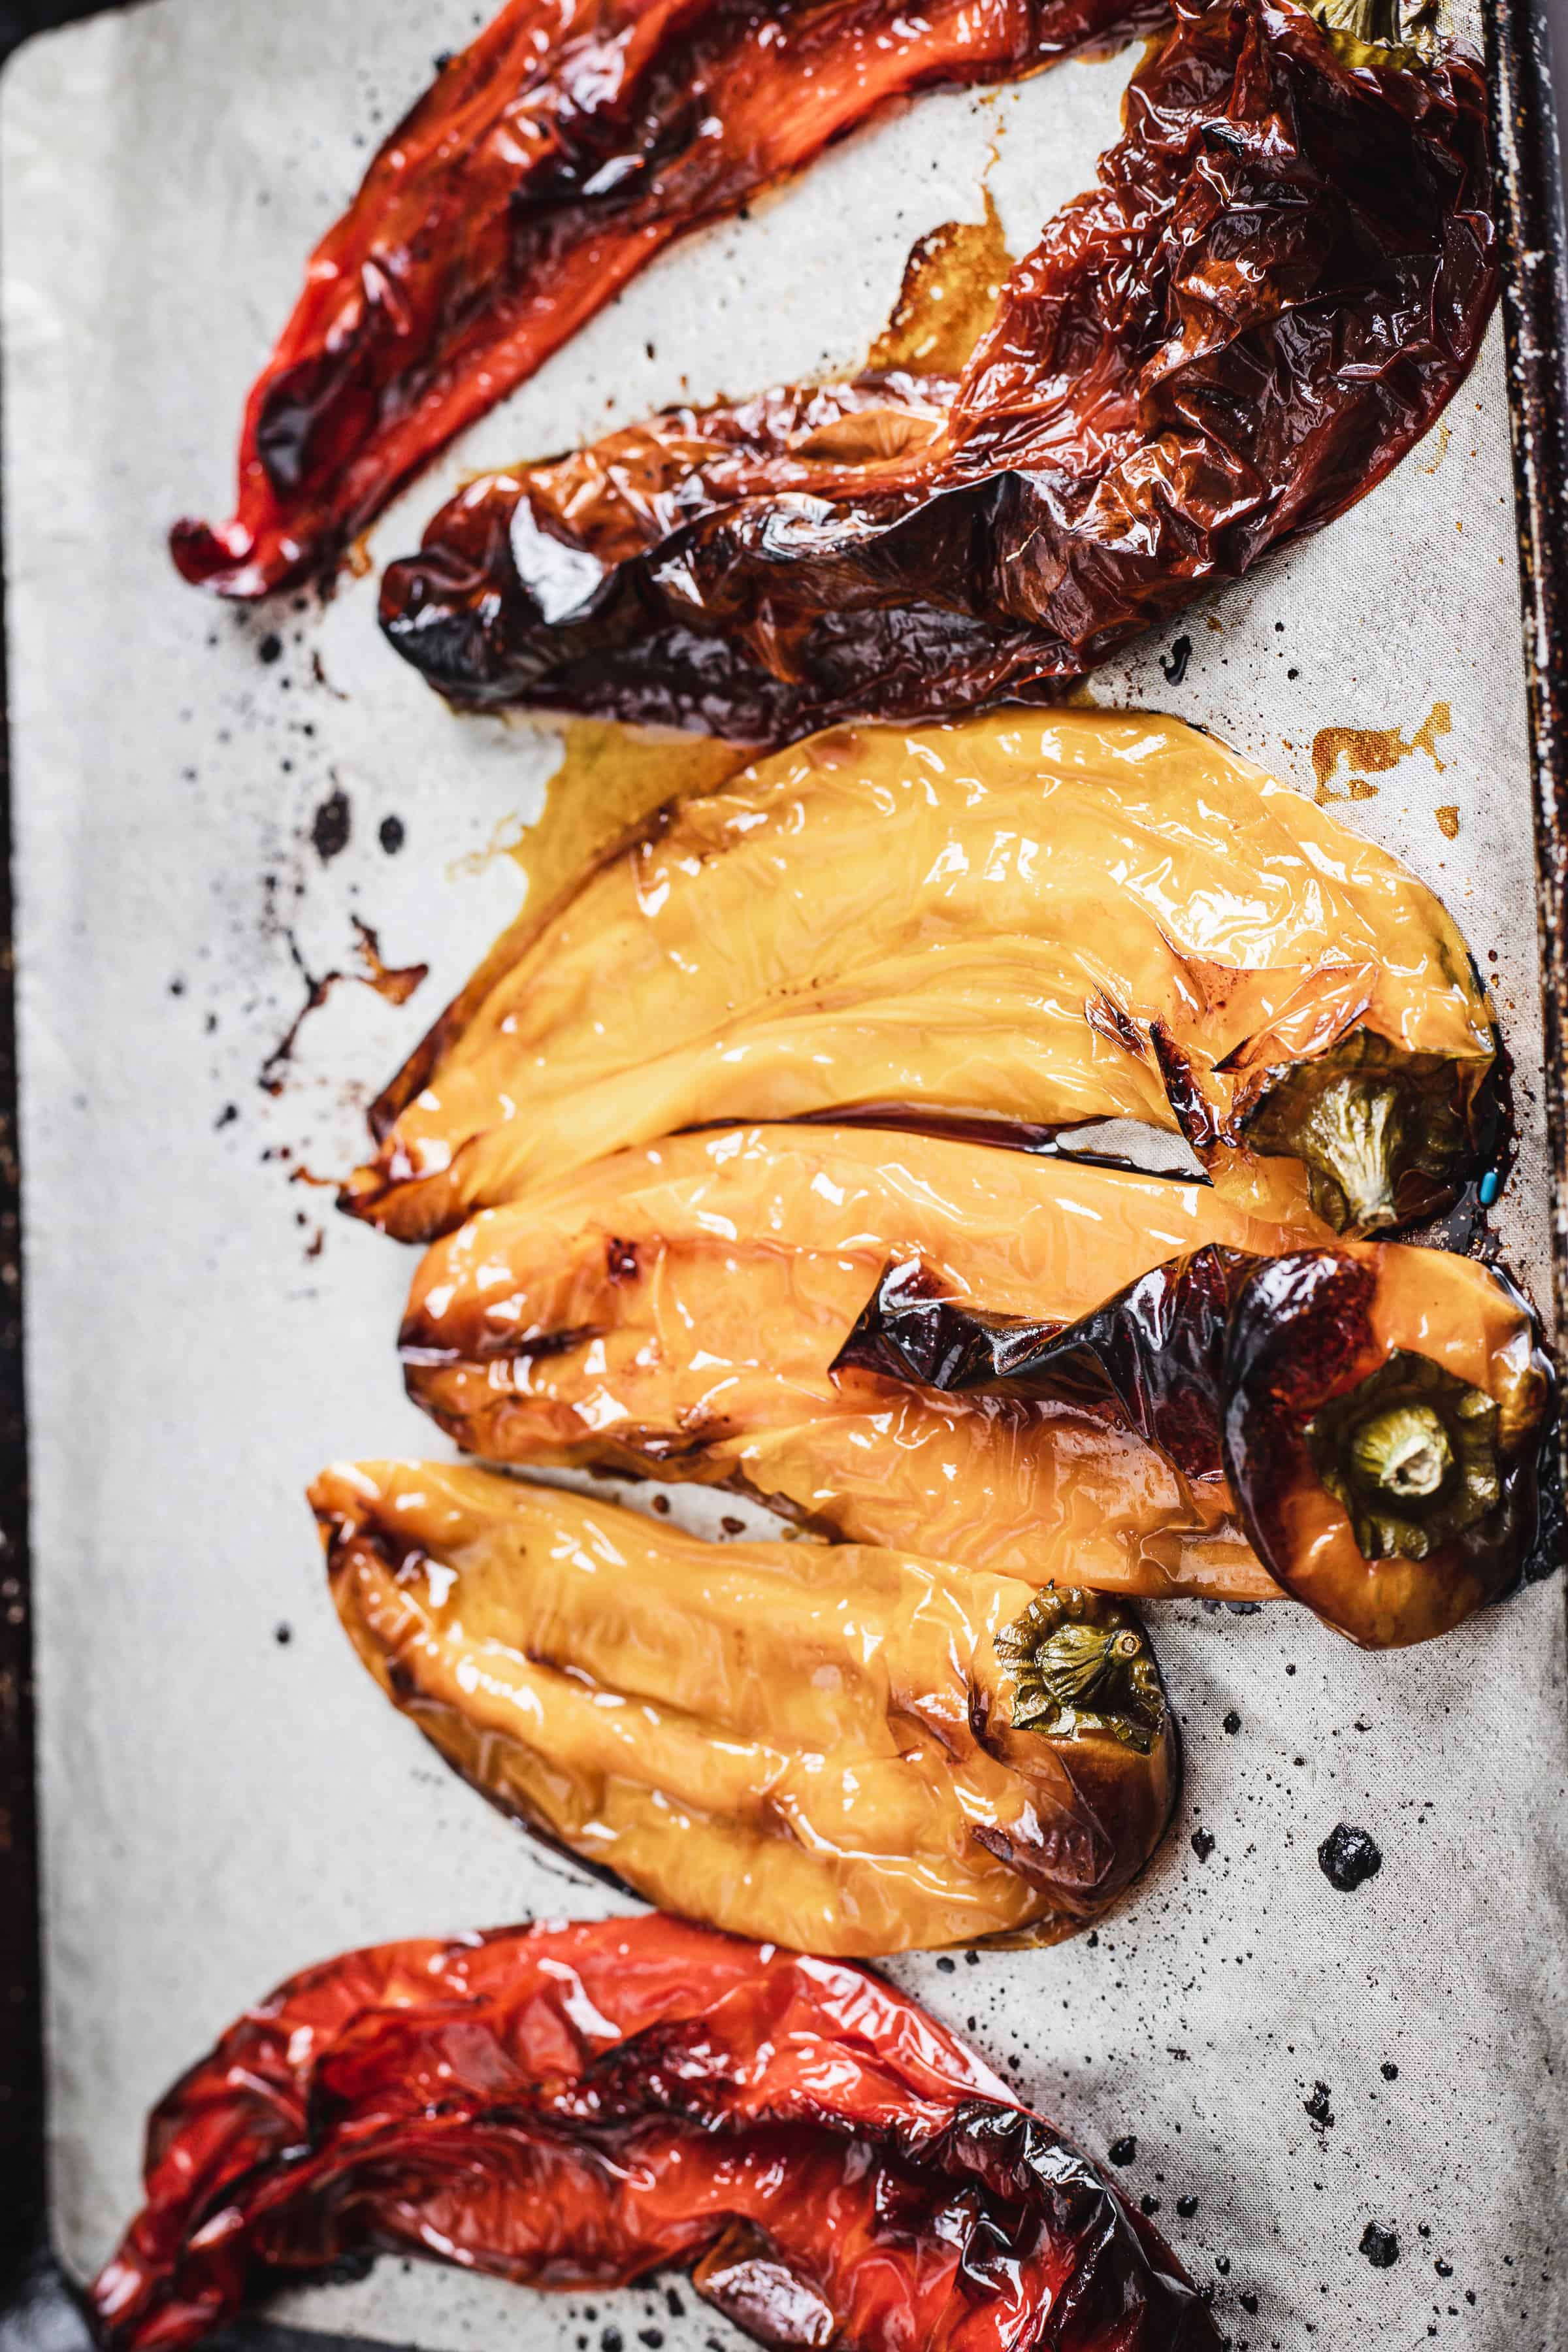 Roasted bell peppers in red and yellow colors, perfect for a rich bell pepper bisque, showing charred and wrinkled skins on a metal baking sheet.